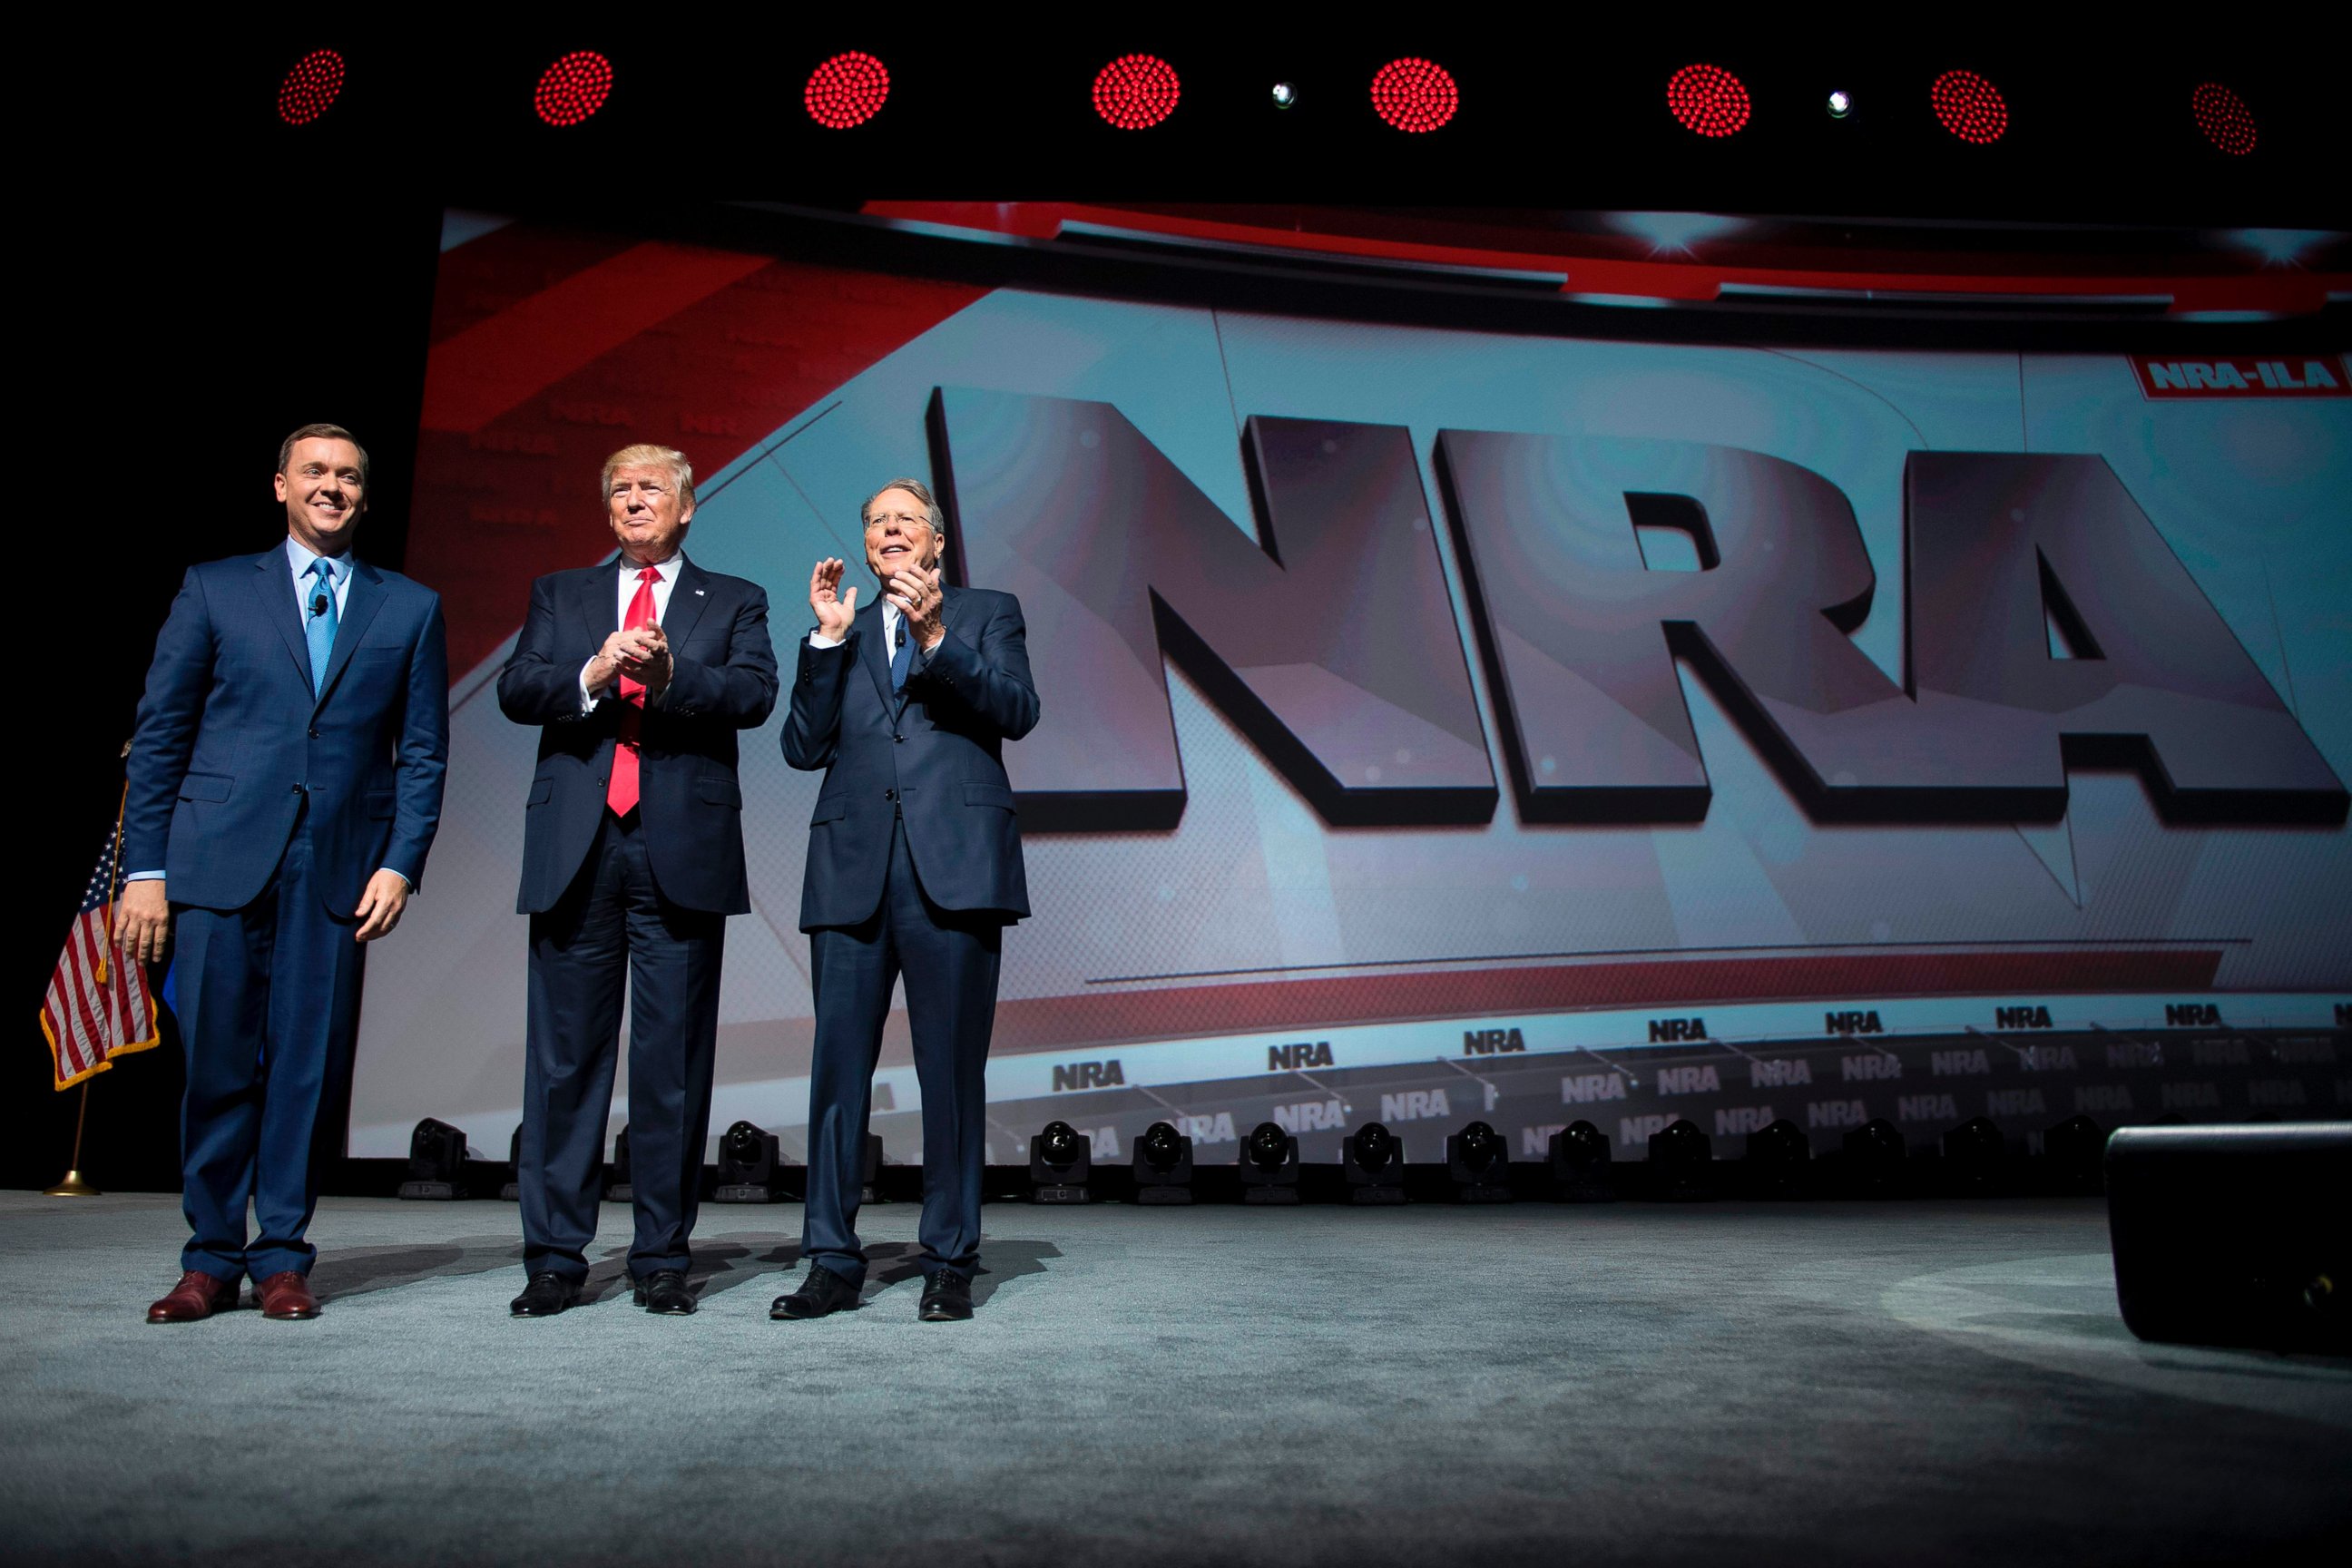 PHOTO: Donald Trump stands with National Rifle Association (NRA) President Wayne LaPierre, right, and NRA-ILA Executive Director Chris Cox during the NRA Leadership Forum in Atlanta, Georgia, April 28, 2017. 